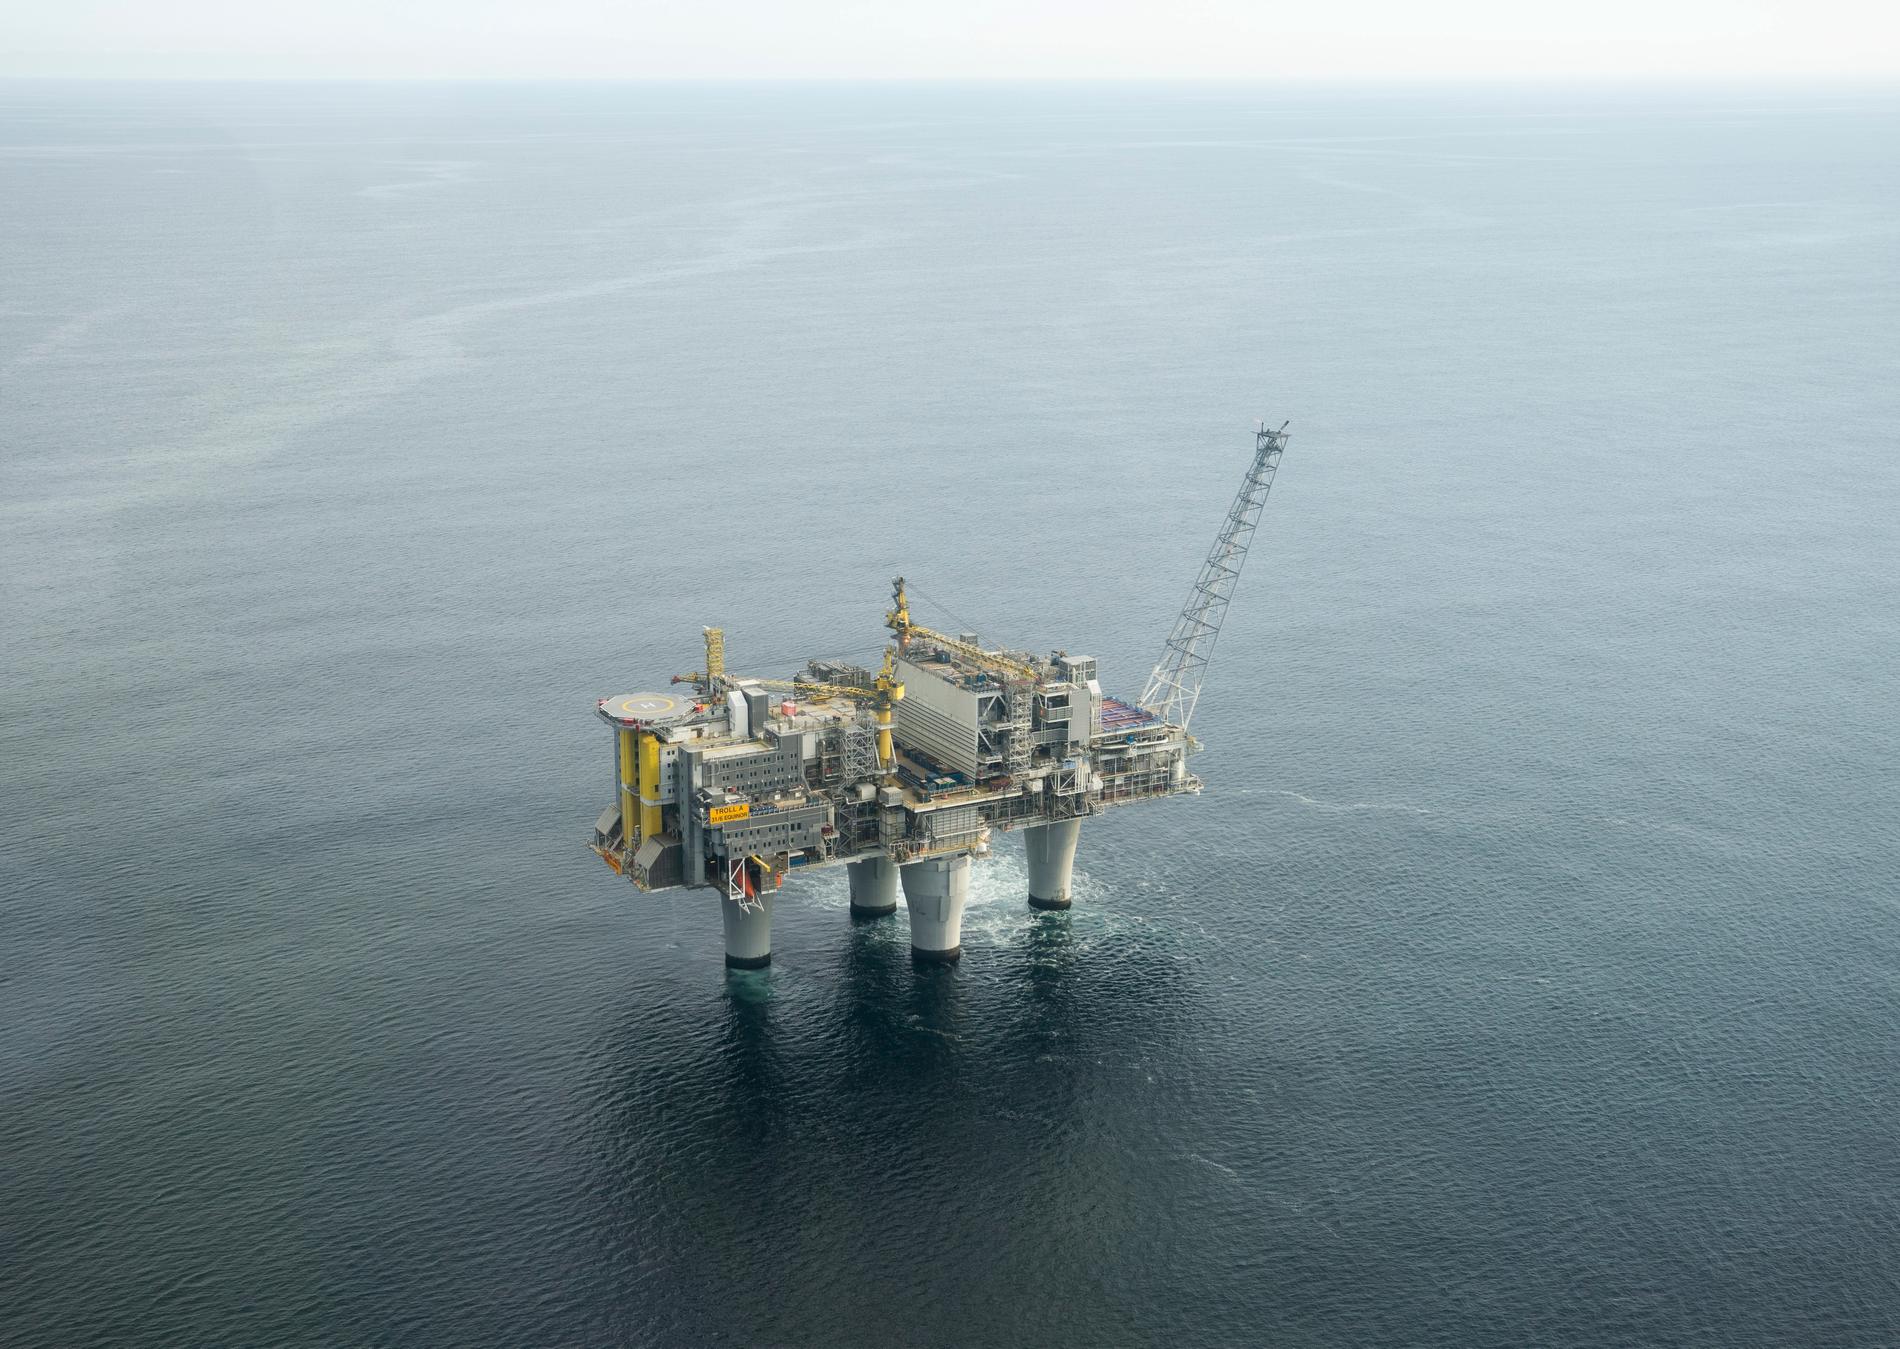 Equinor expects $1 billion profit on financial gas contracts – E24